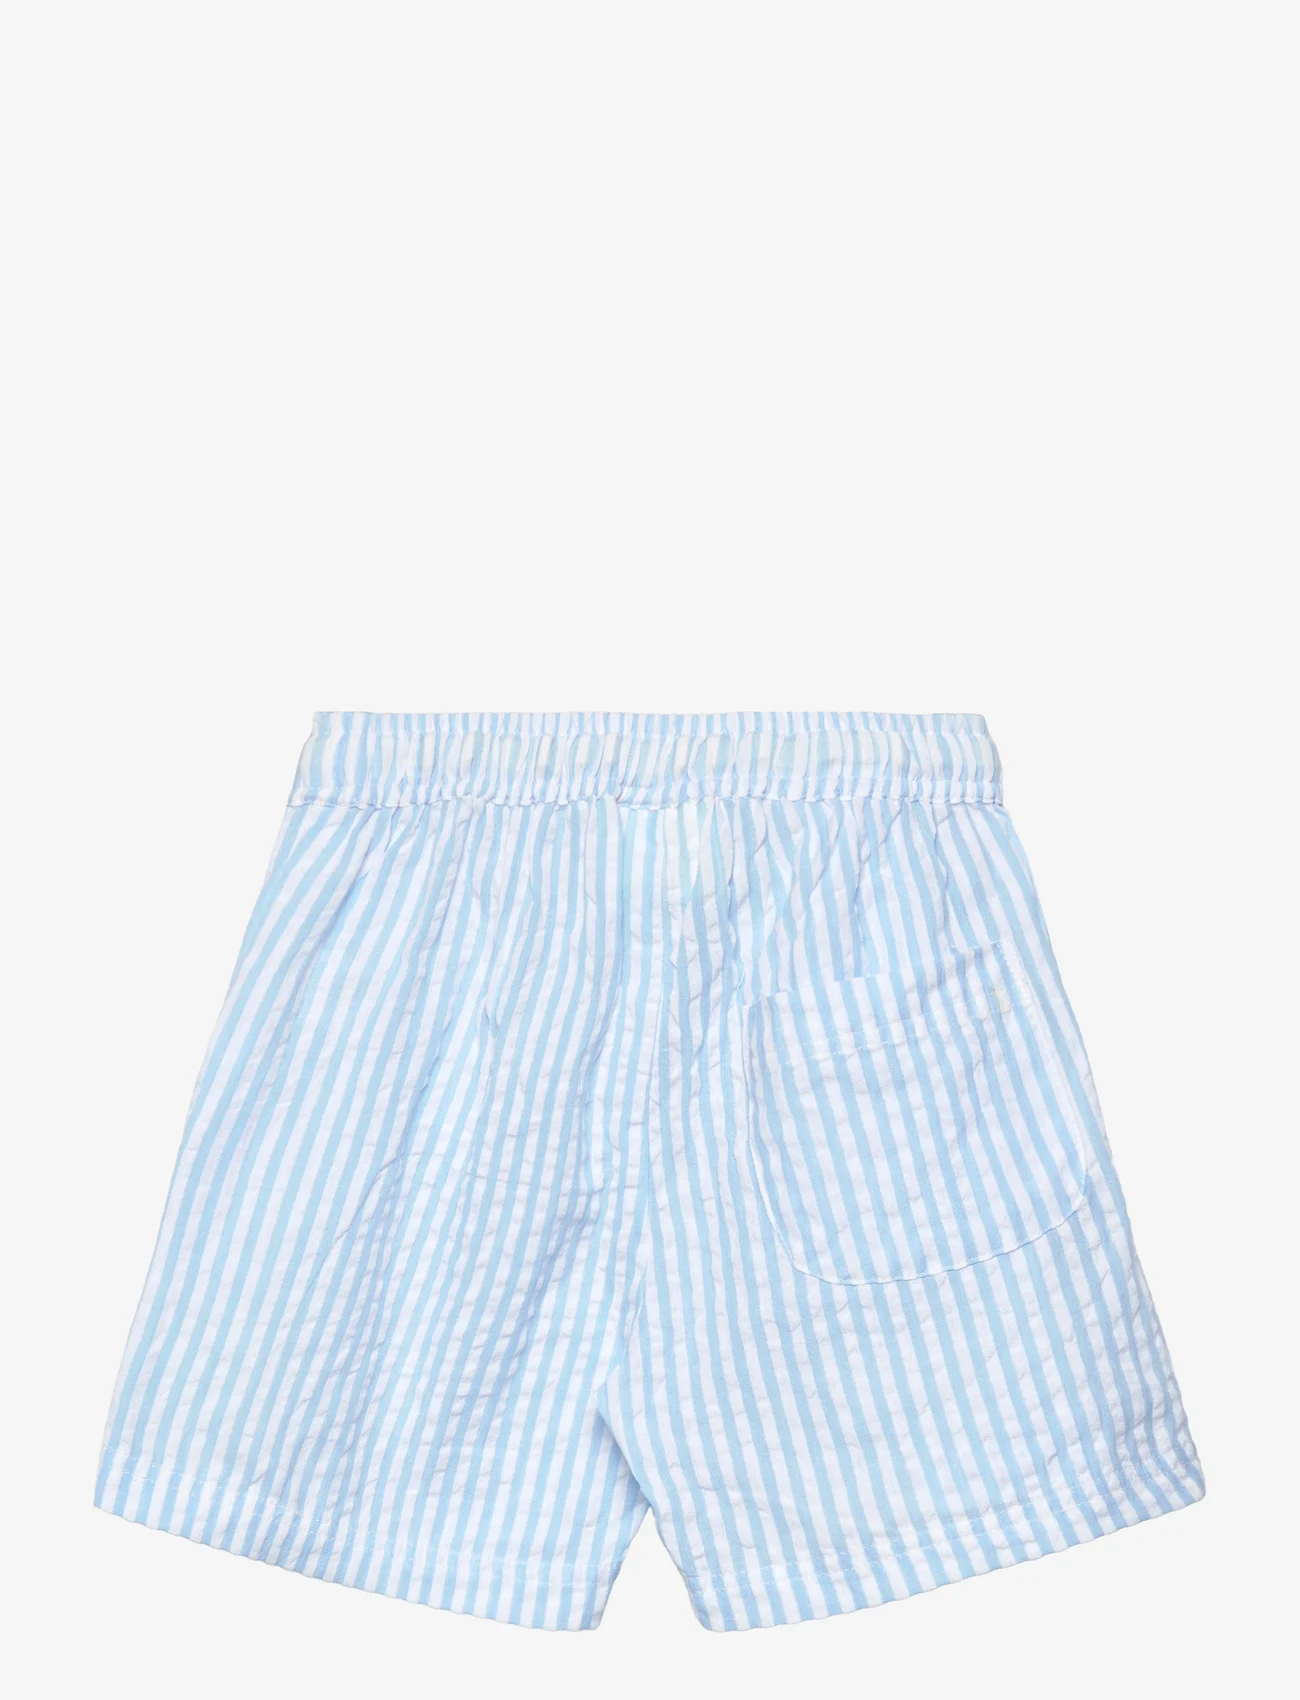 Sofie Schnoor Baby and Kids - Shorts - sweat shorts - ice blue - 1